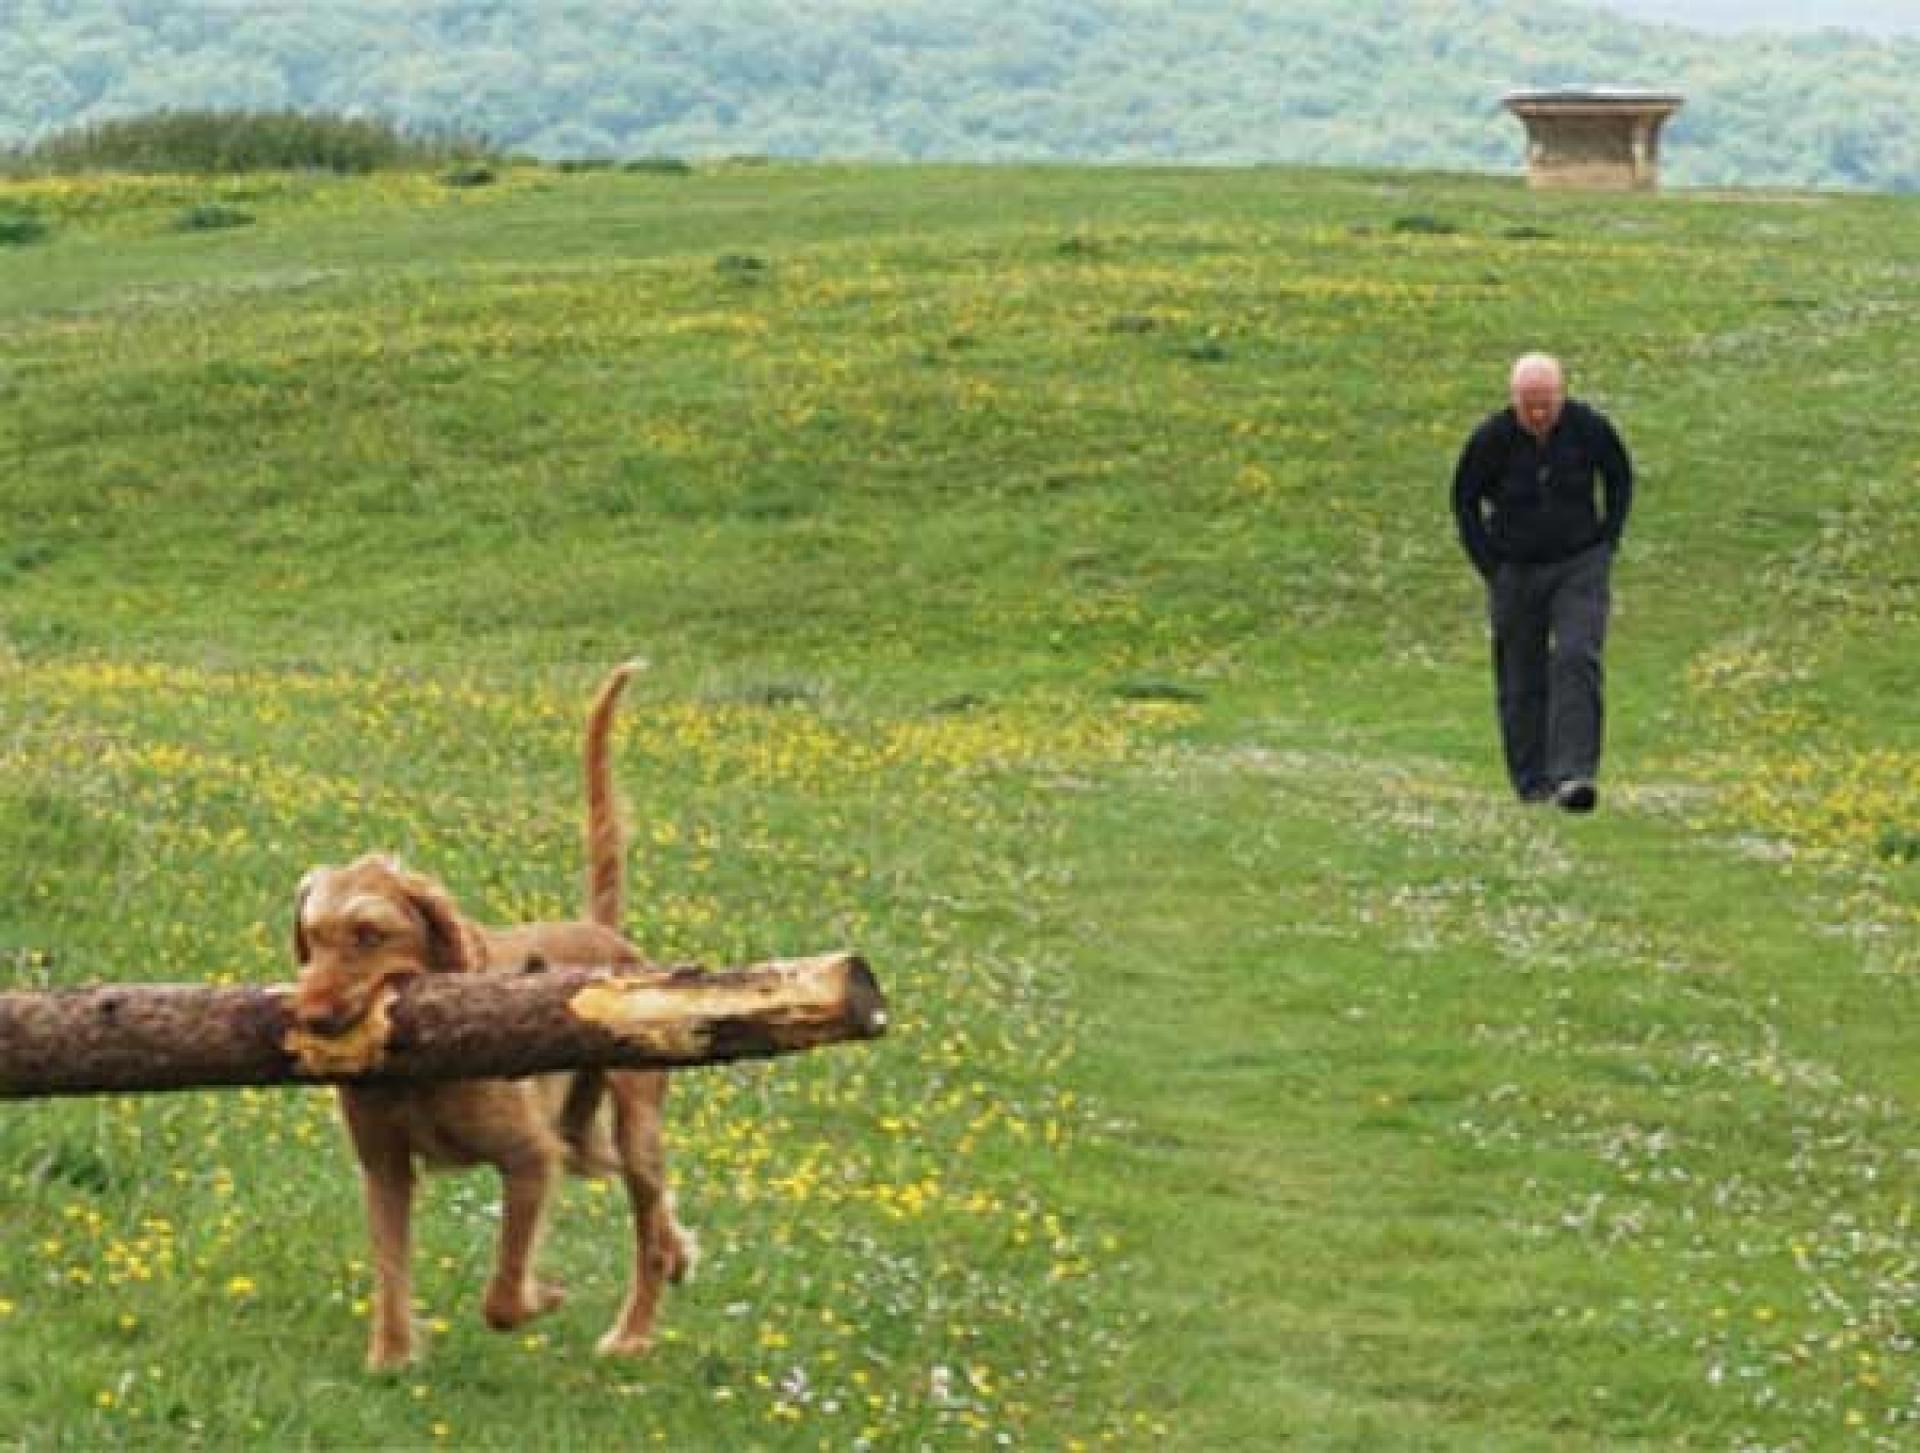 A dog carries a stick on a dog-friendly walking holiday